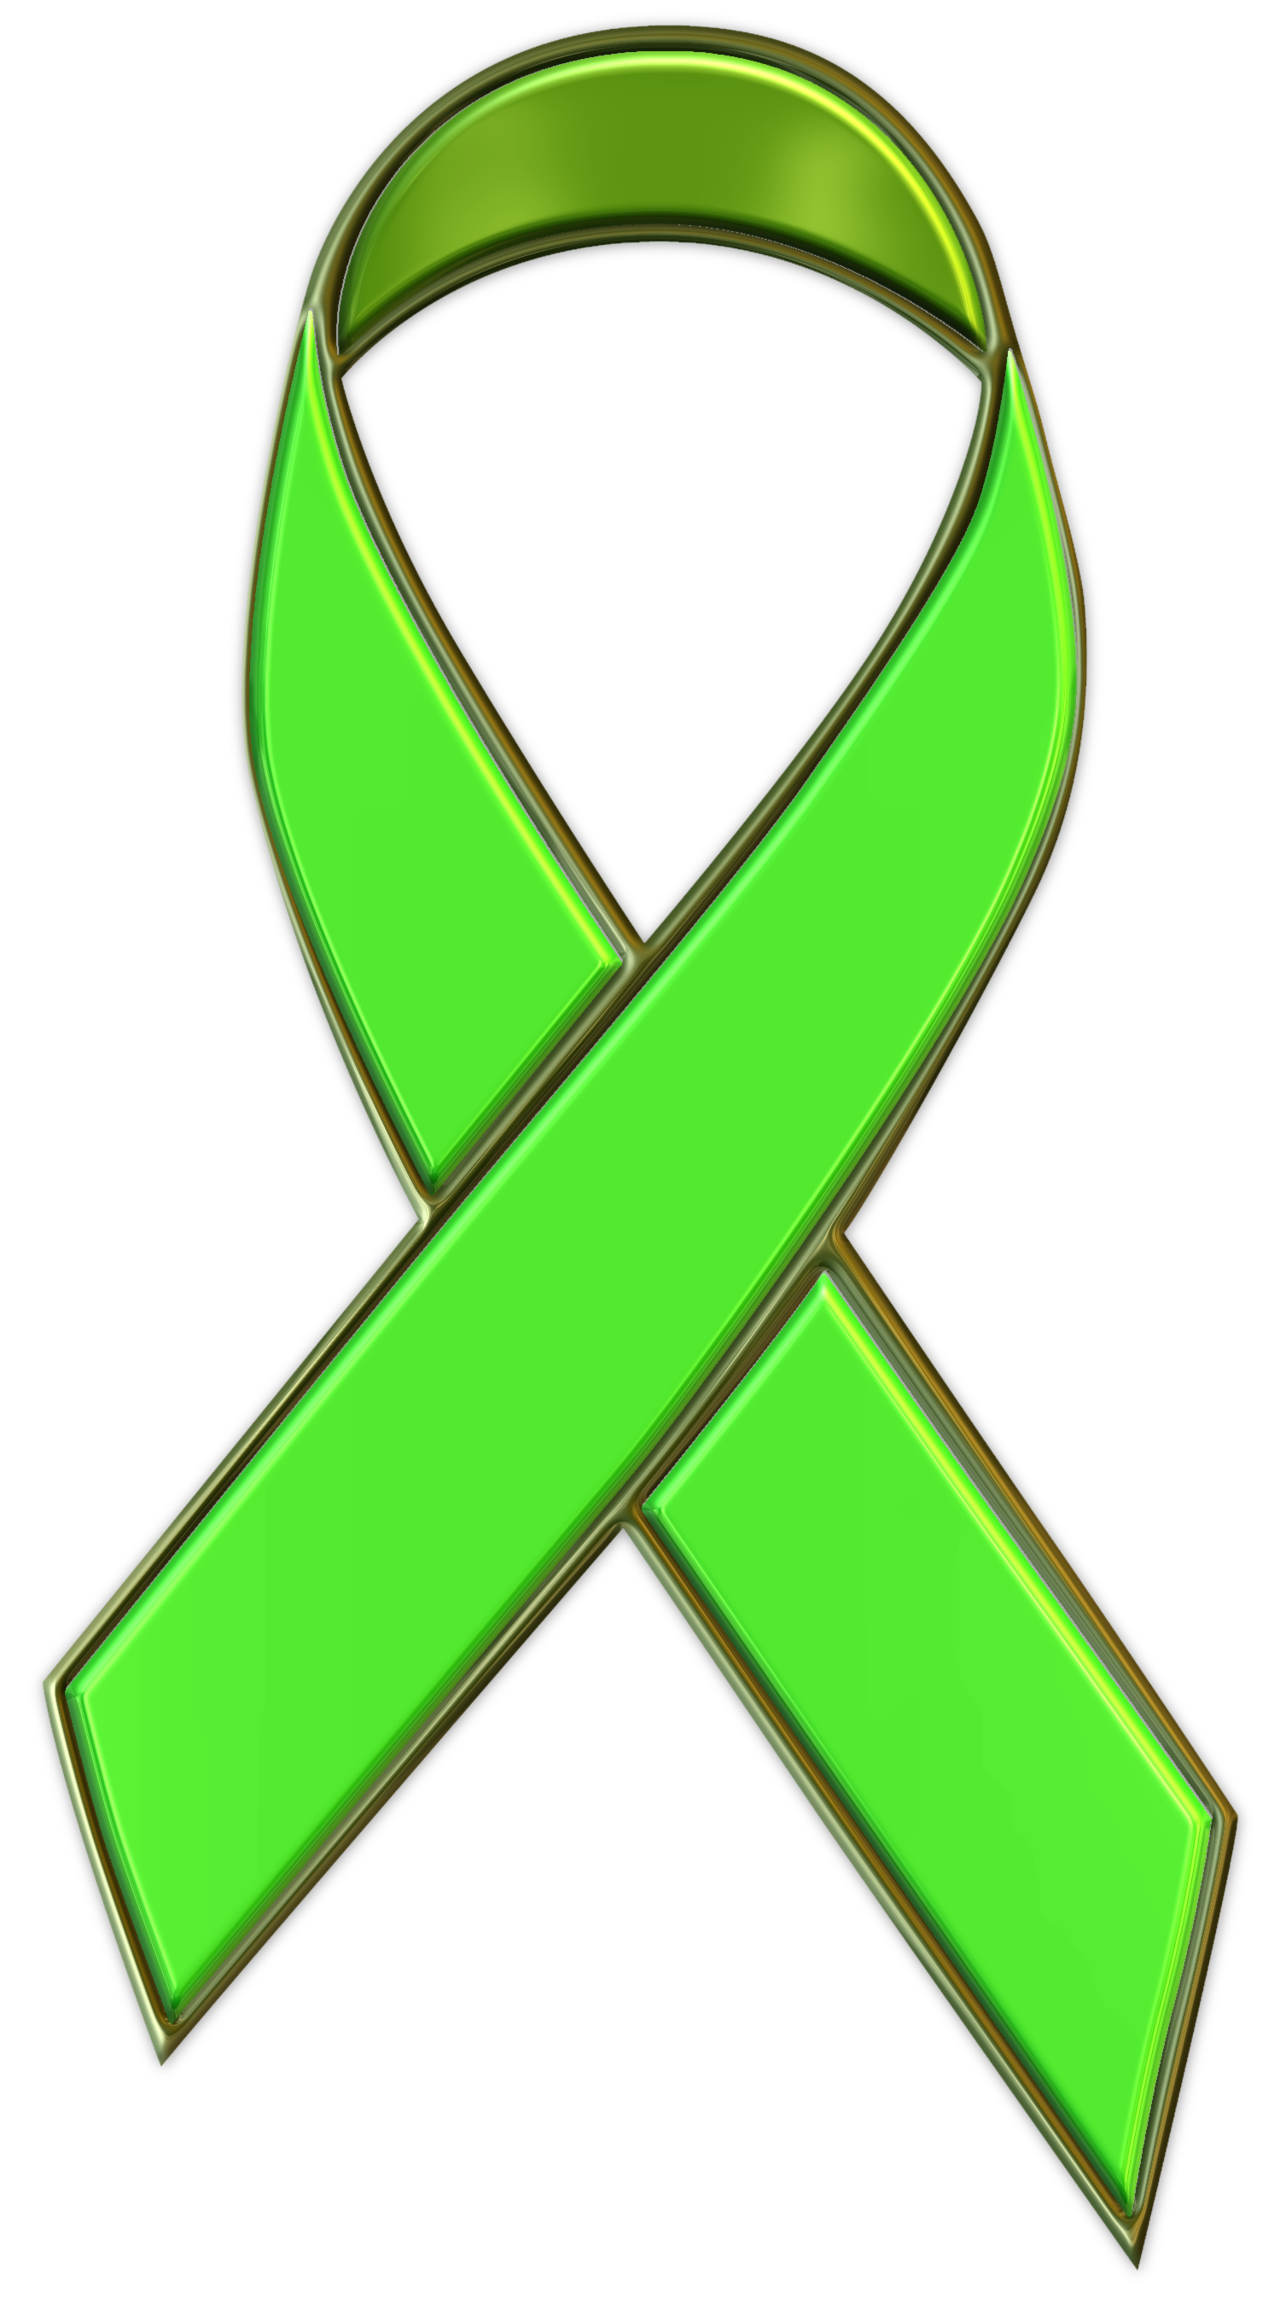 Green Ribbon PNG Images, Download 2100+ Green Ribbon PNG Resources with  Transparent Background